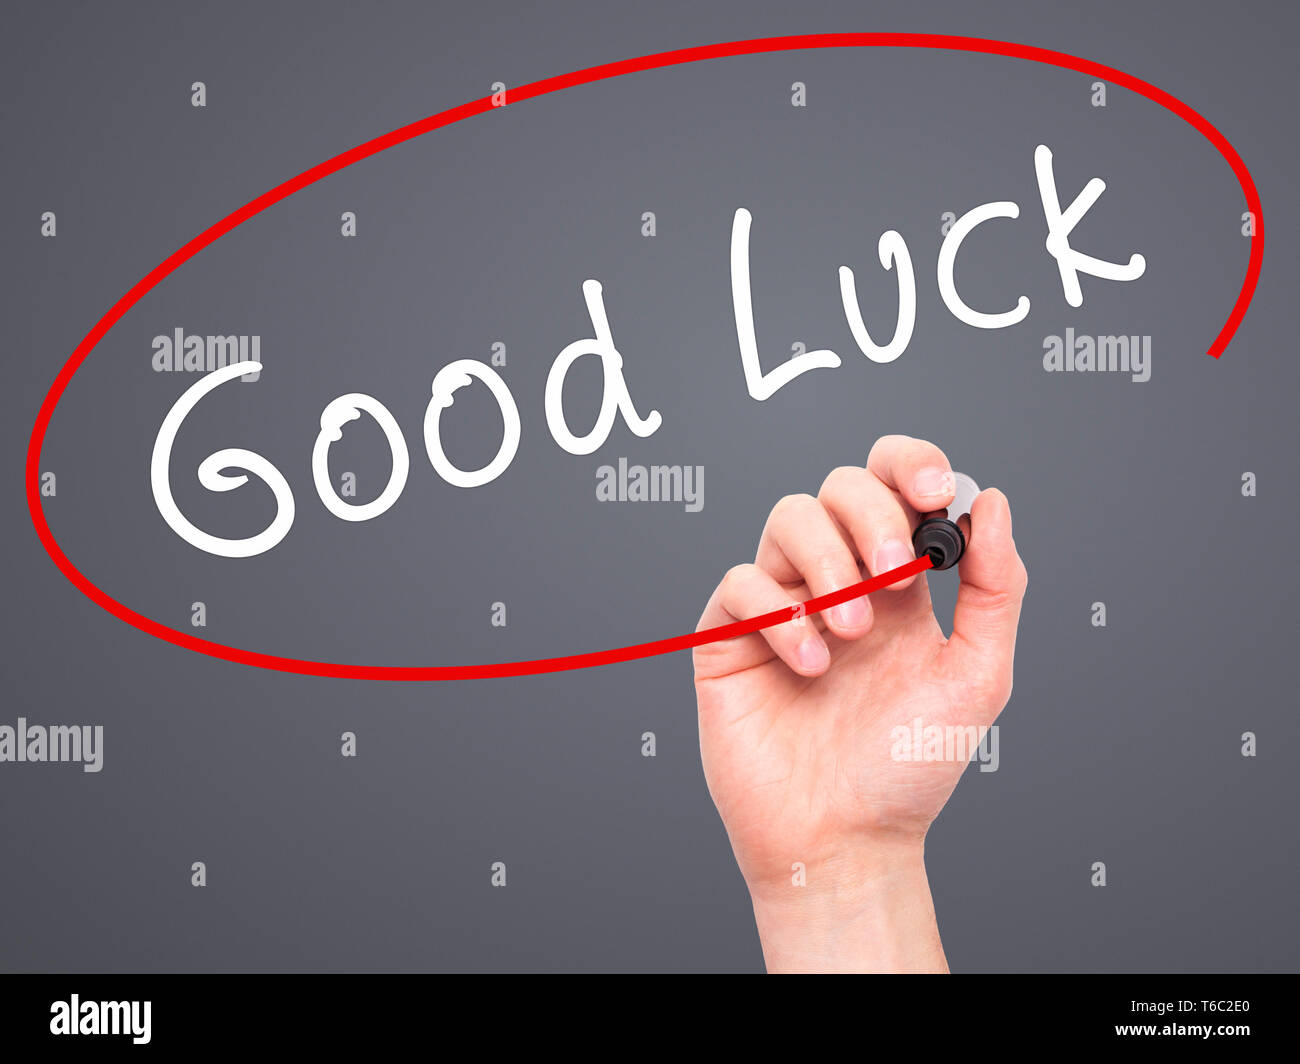 Man Hand writing Good Luck with marker on transparent wipe board Stock Photo